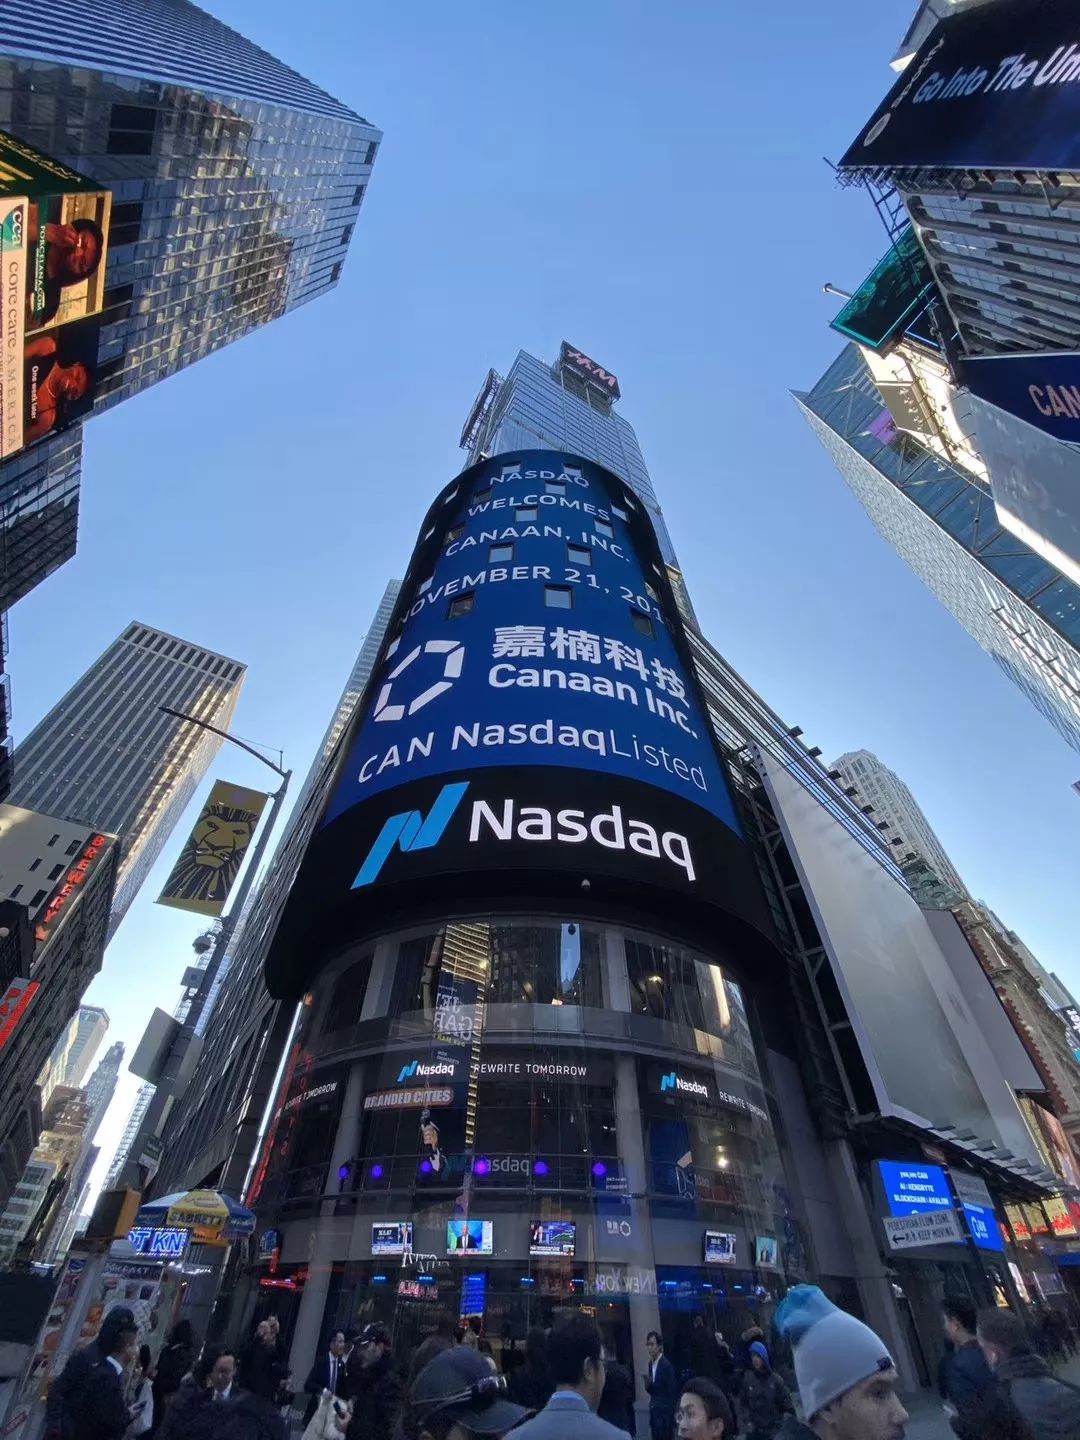 Jianan Technology Landed on NASDAQ: The First Block of the Global Blockchain was born